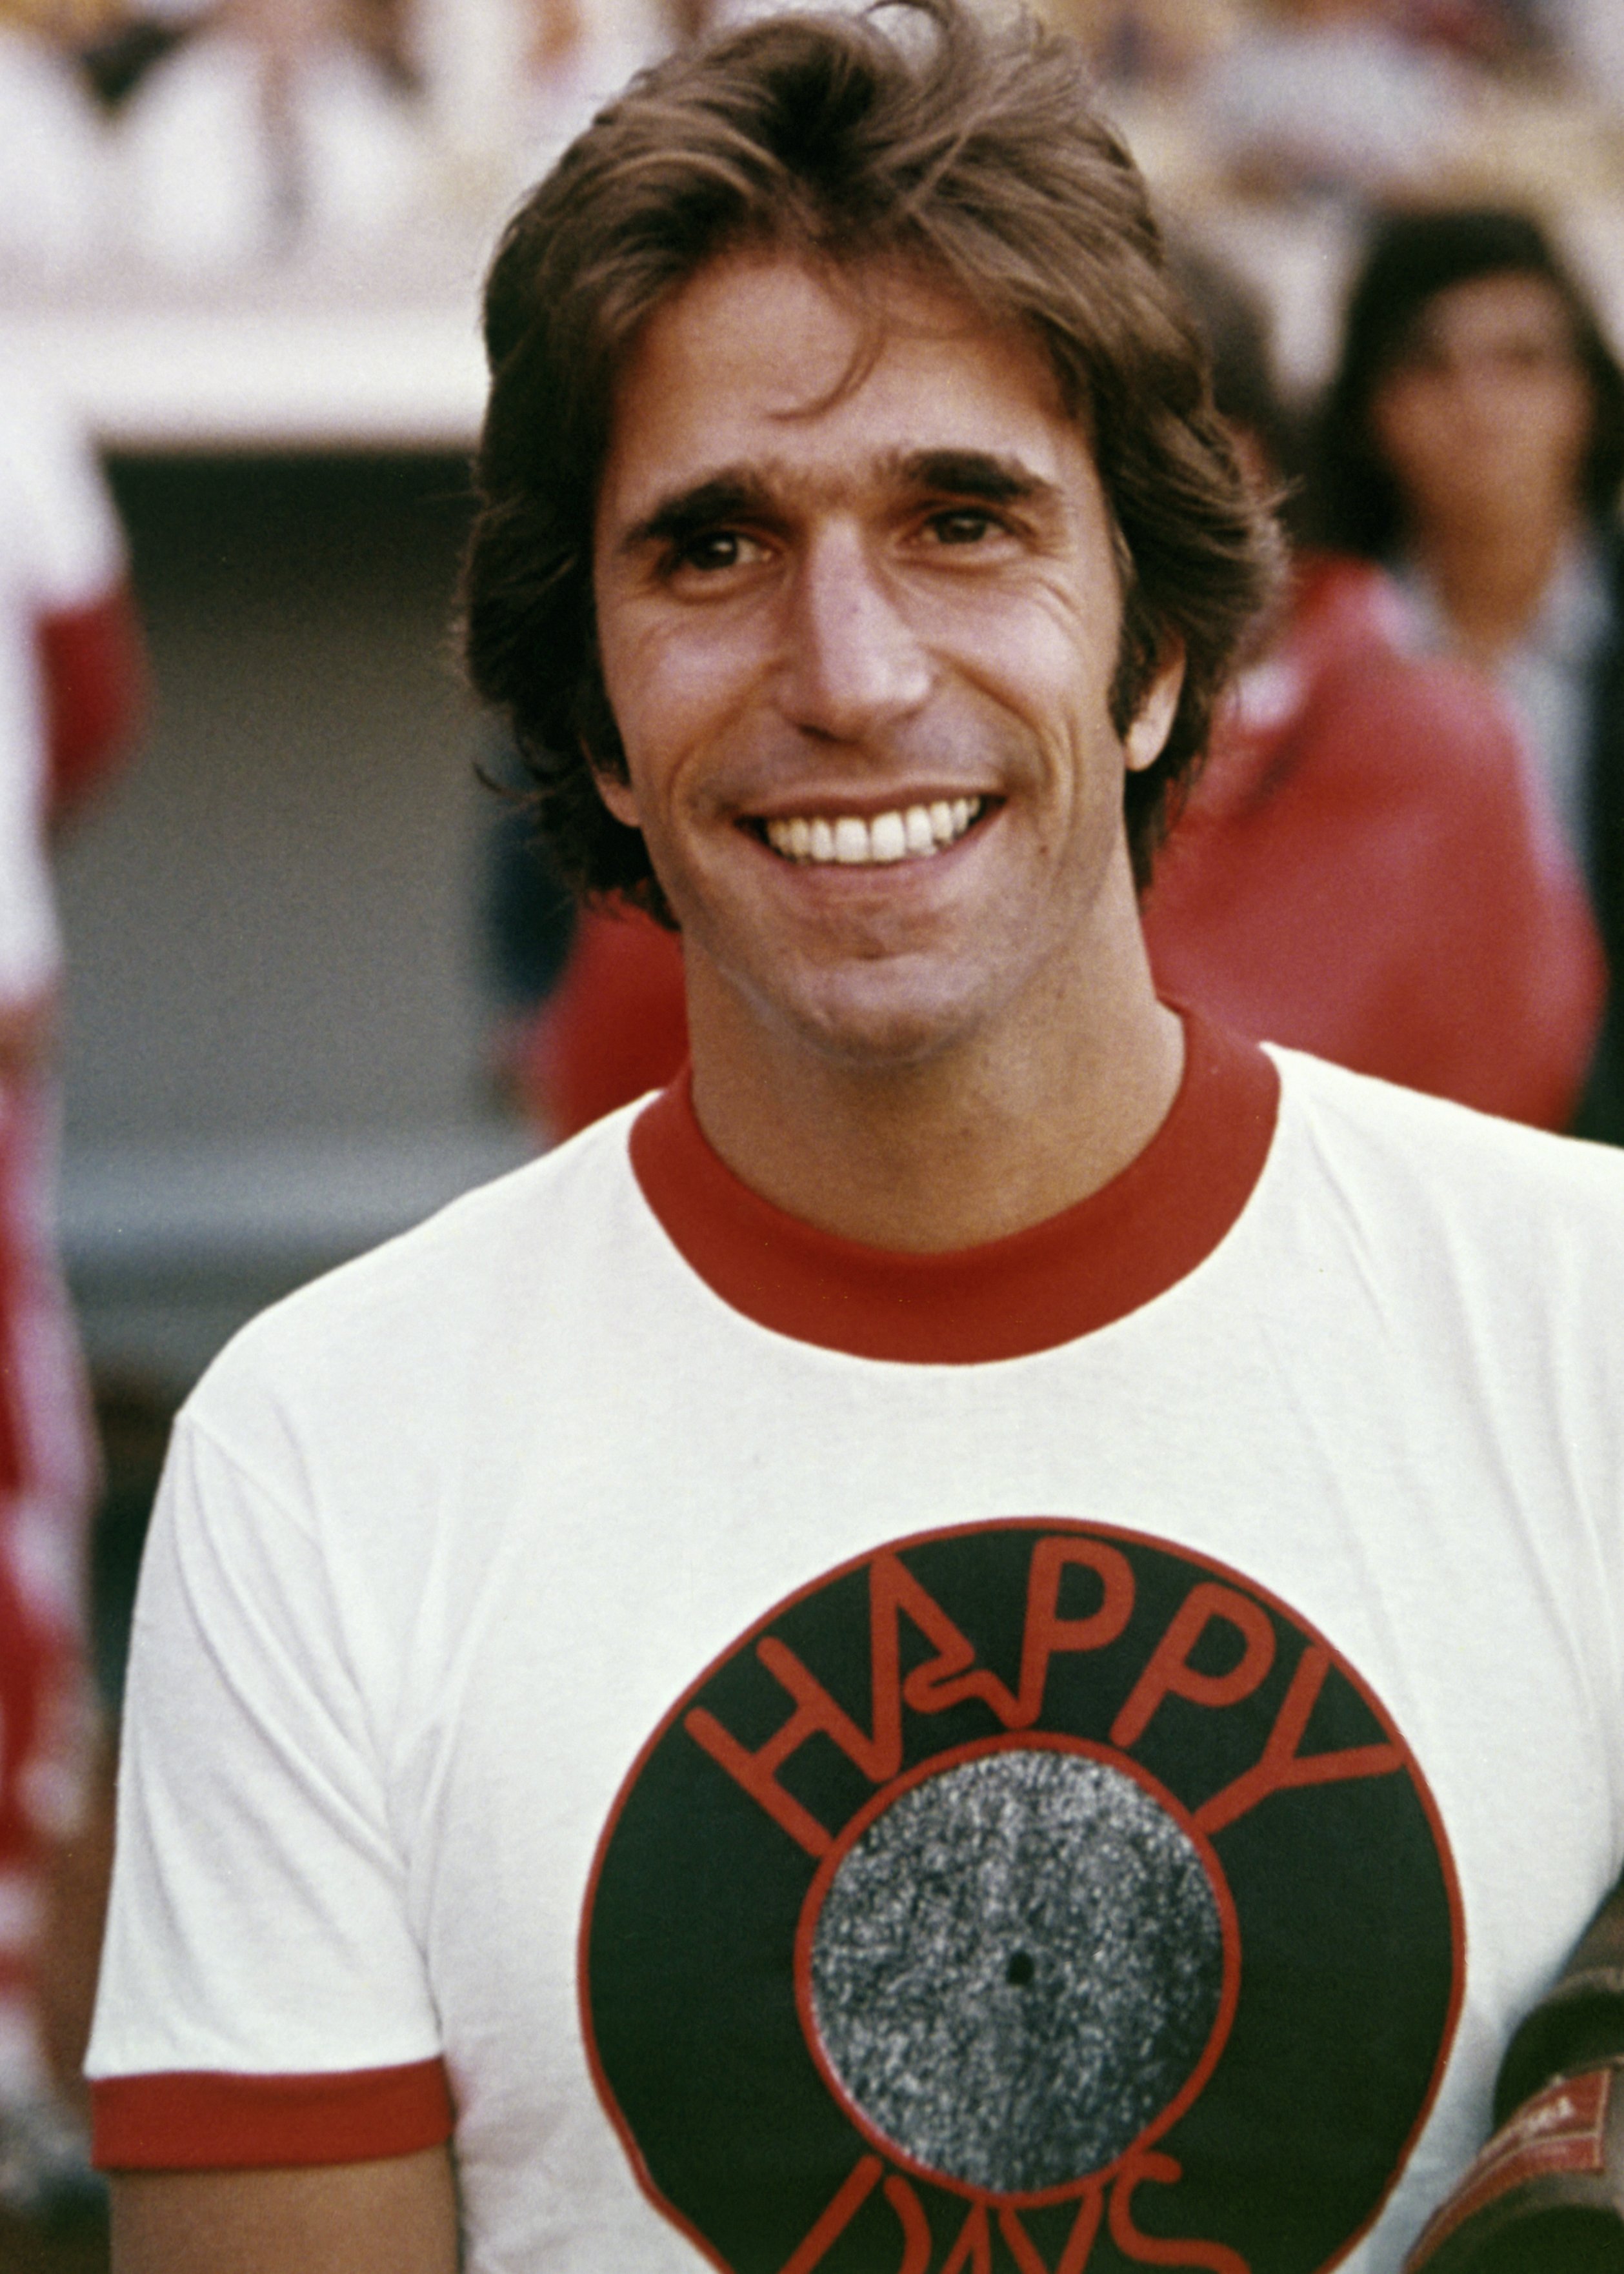 Henry Winkler promoting "Happy Days" circa 1975 | Source: Getty Images